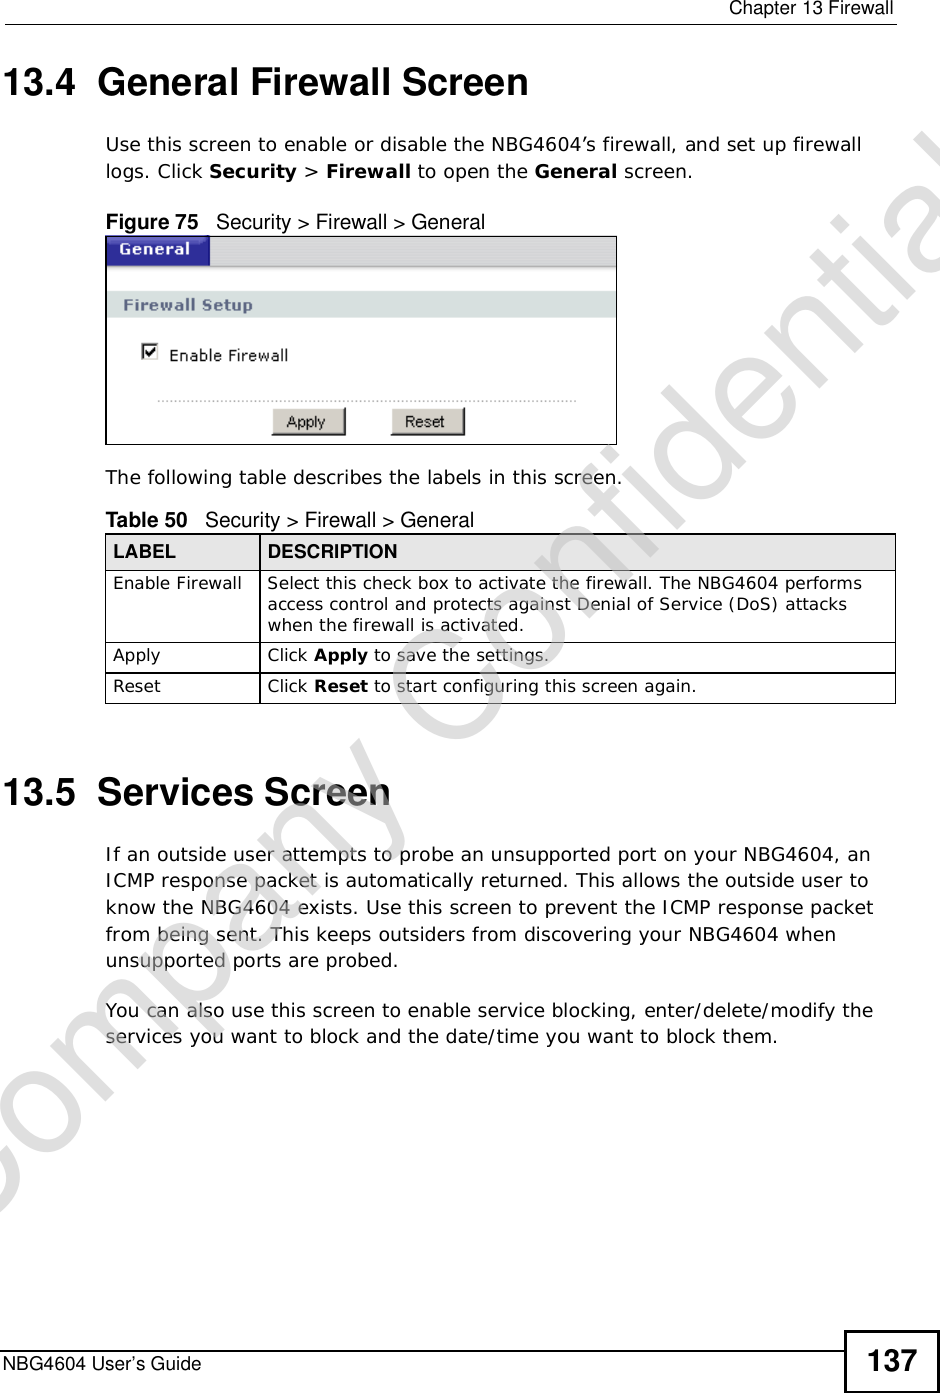  Chapter 13FirewallNBG4604 User’s Guide 13713.4  General Firewall ScreenUse this screen to enable or disable the NBG4604’s firewall, and set up firewall logs. Click Security &gt; Firewall to open the General screen.Figure 75   Security &gt; Firewall &gt; General The following table describes the labels in this screen.13.5  Services ScreenIf an outside user attempts to probe an unsupported port on your NBG4604, an ICMP response packet is automatically returned. This allows the outside user to know the NBG4604 exists. Use this screen to prevent the ICMP response packet from being sent. This keeps outsiders from discovering your NBG4604 when unsupported ports are probed.You can also use this screen to enable service blocking, enter/delete/modify the services you want to block and the date/time you want to block them.Table 50   Security &gt; Firewall &gt; General LABEL DESCRIPTIONEnable FirewallSelect this check box to activate the firewall. The NBG4604 performs access control and protects against Denial of Service (DoS) attacks when the firewall is activated.Apply Click Apply to save the settings. Reset Click Reset to start configuring this screen again. Company Confidential